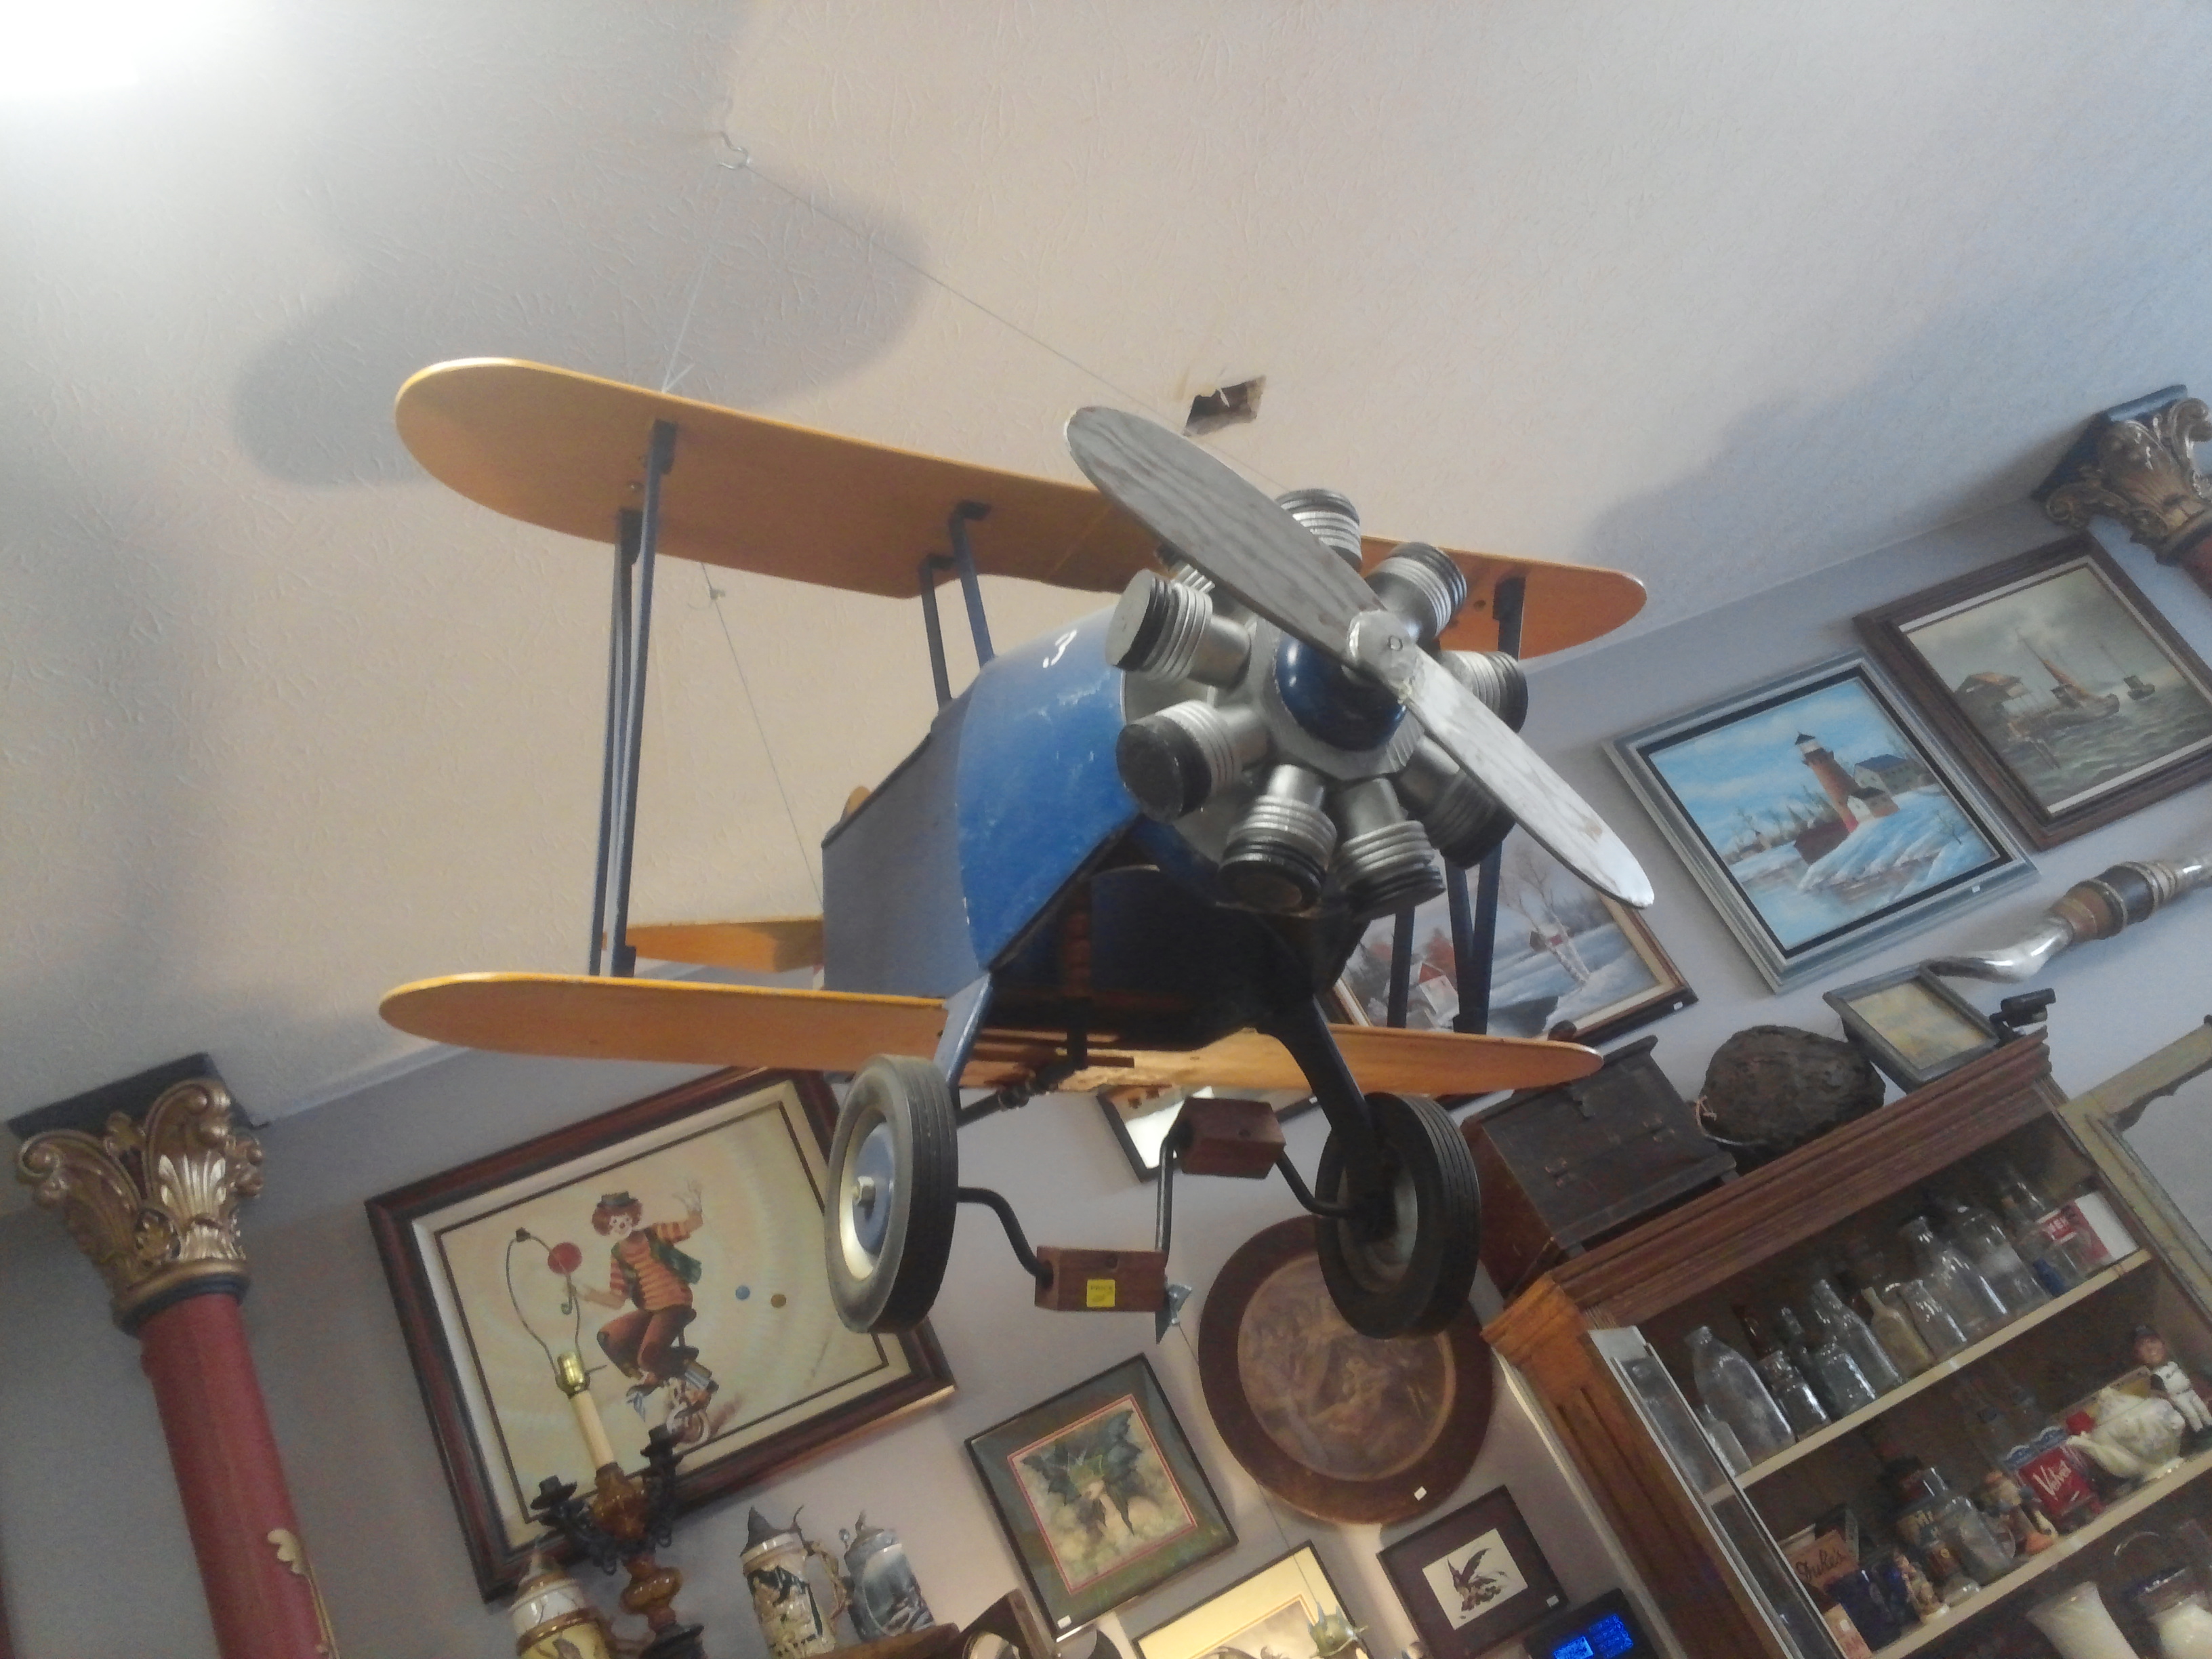 airplane pedal car for sale